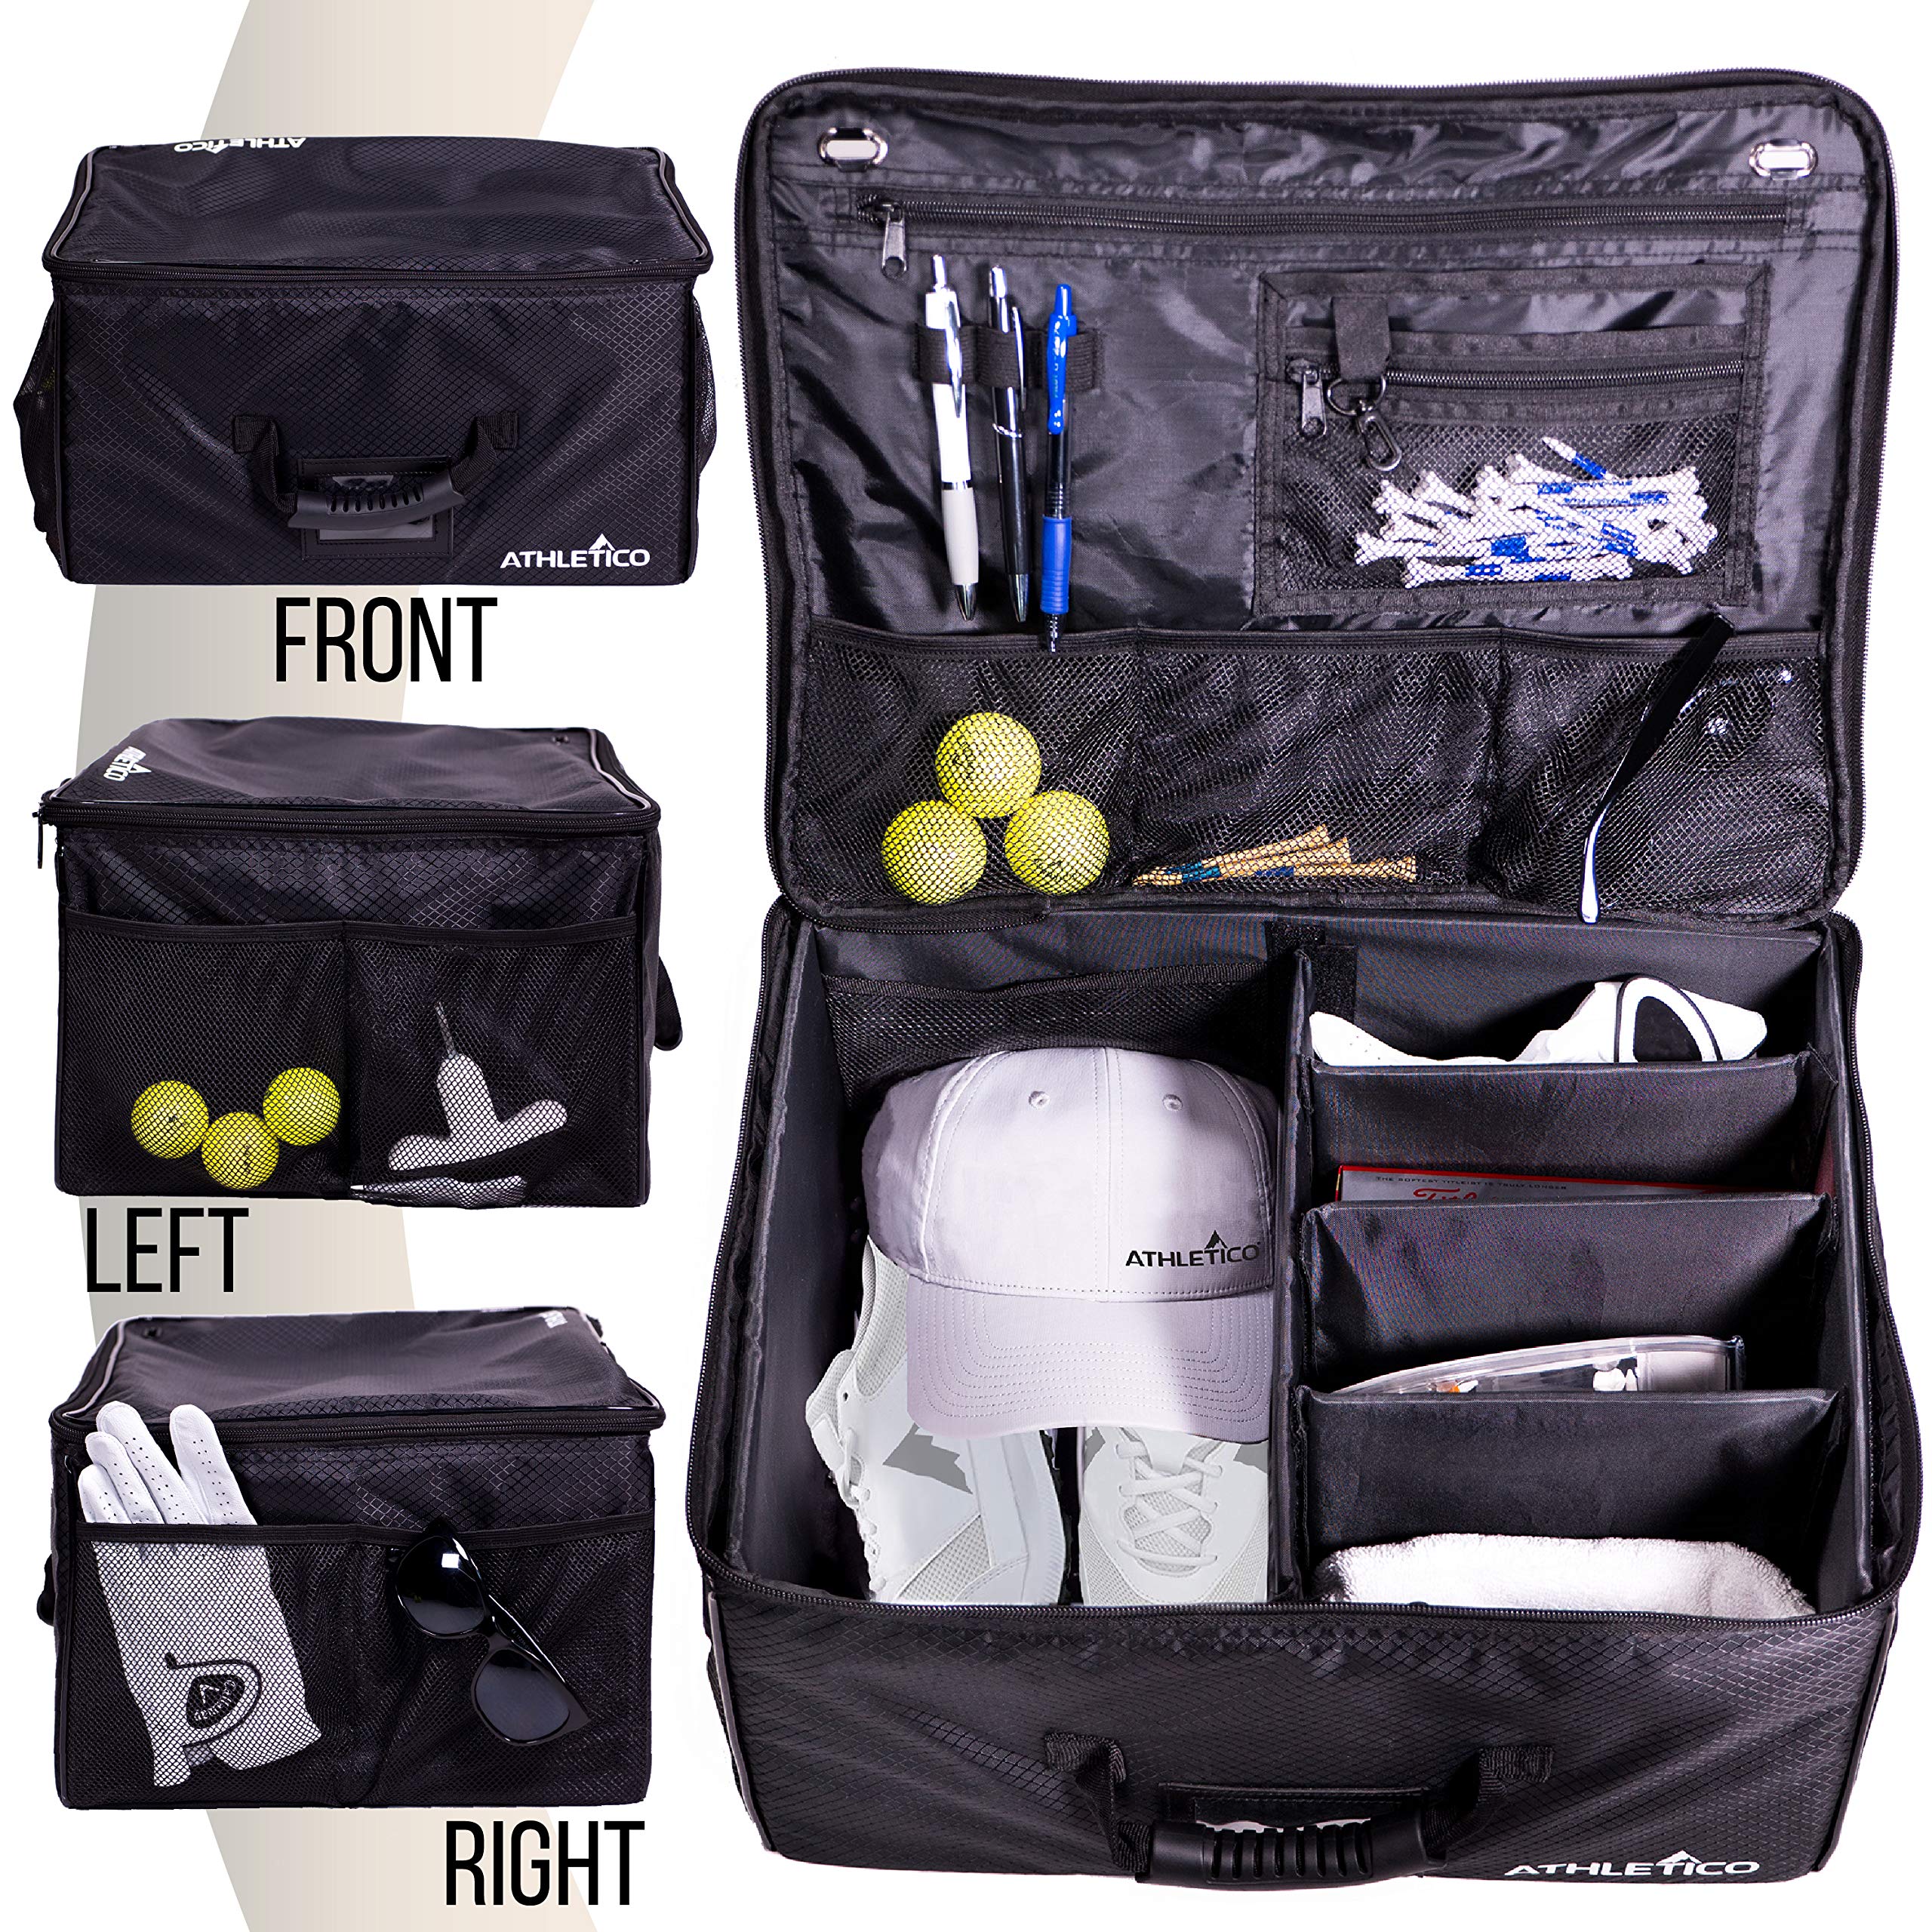 Athletico Golf Trunk Organizer Storage - Car Golf Locker to Store Golf Accessories | Collapsible When Not in Use  - Good